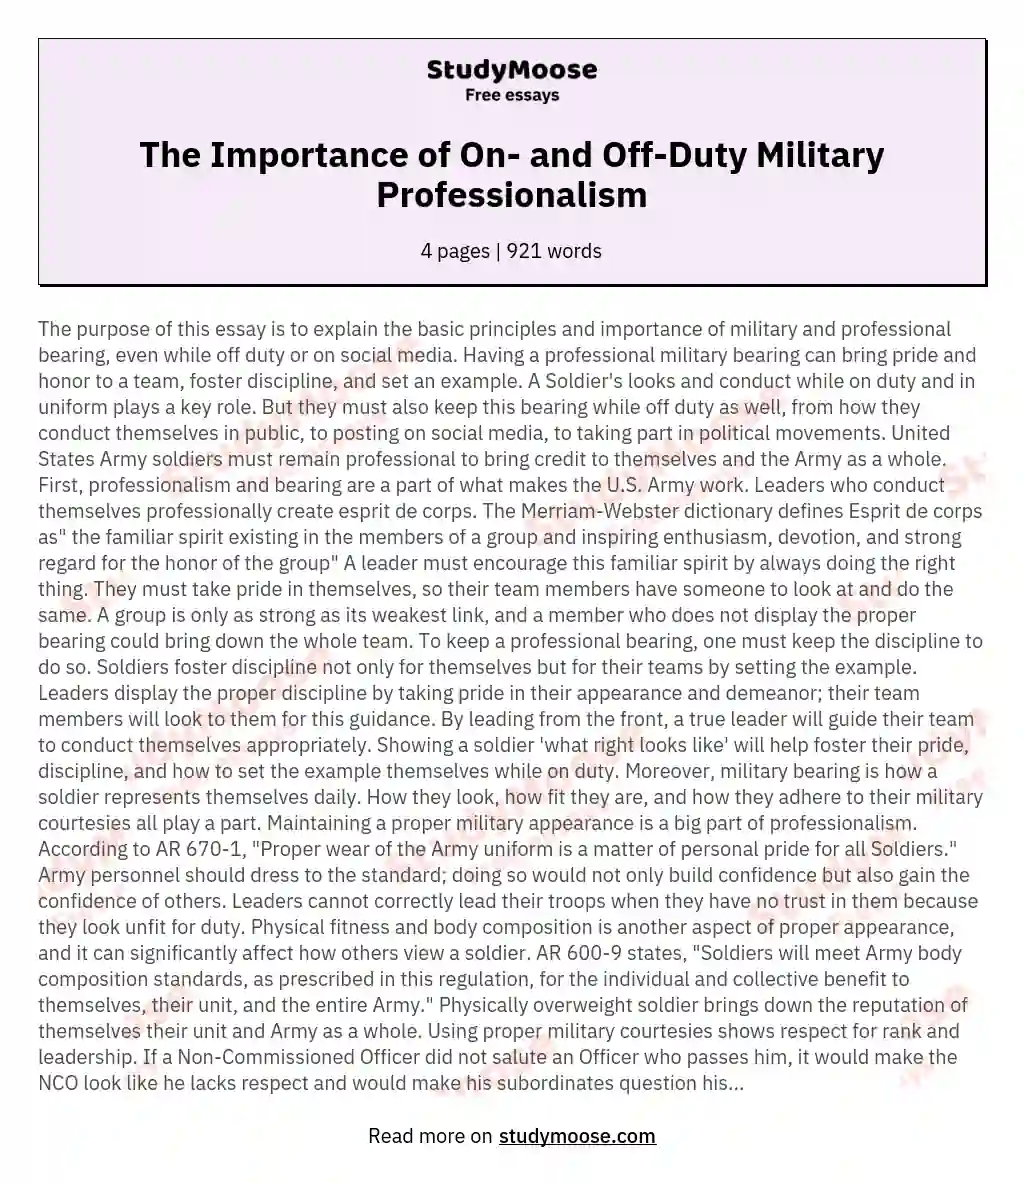 The Importance of On- and Off-Duty Military Professionalism essay